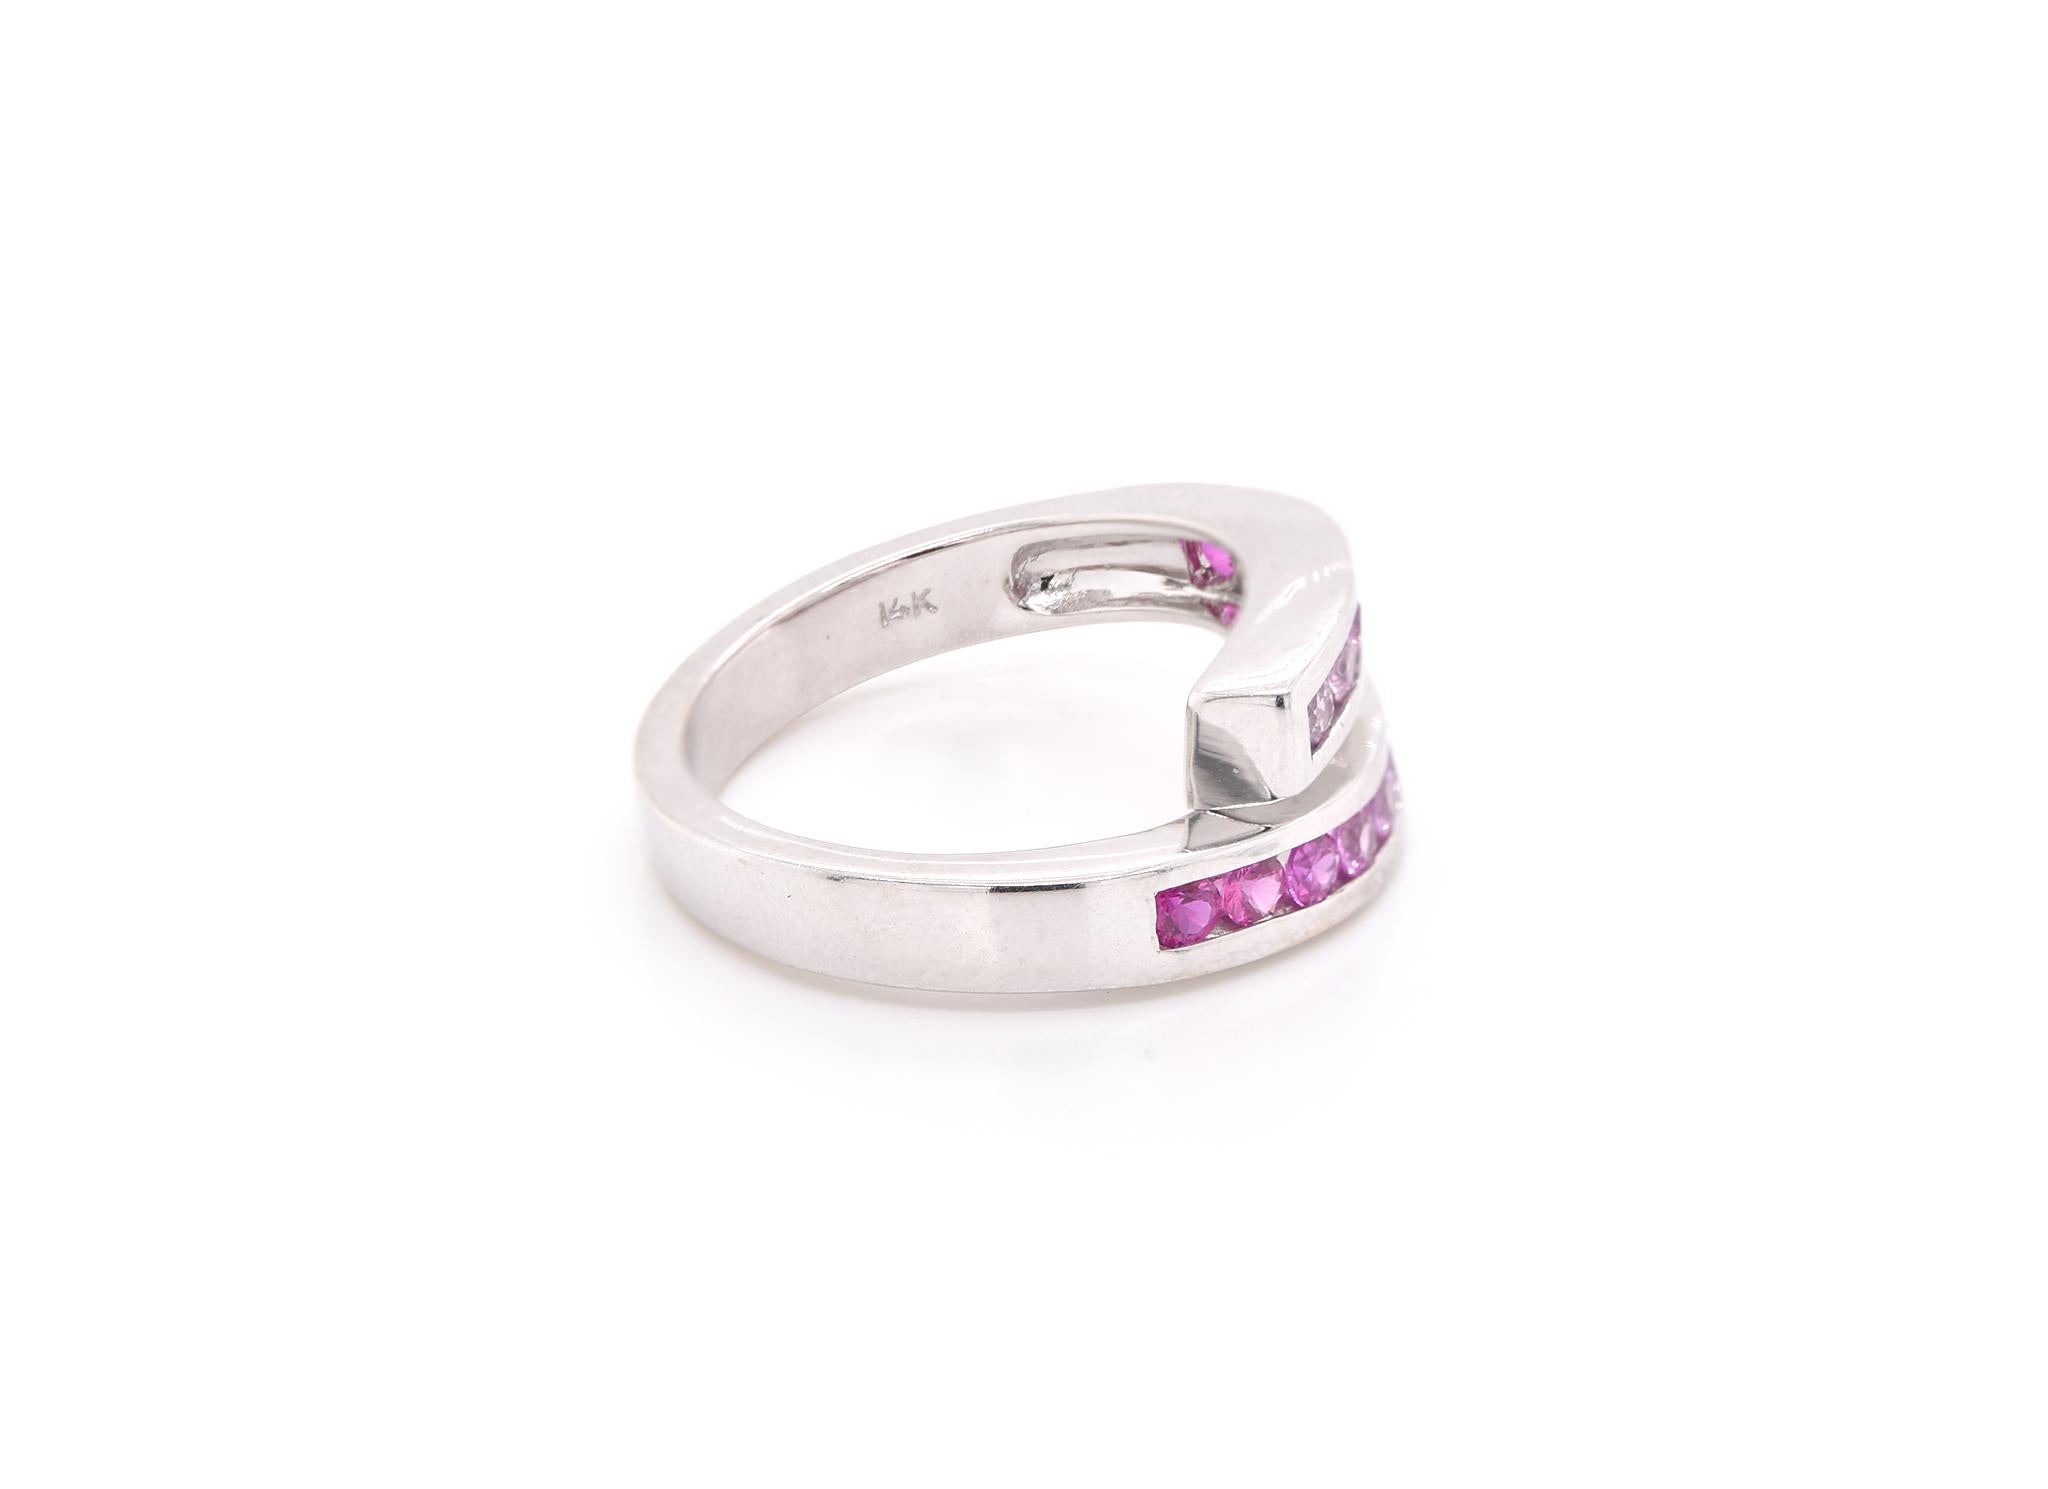 Material: 14k white gold
Gemstone: pink to red sapphires and rubies
Ring Size: 7 (allow up to two additional business days for sizing requests)
Dimensions: ring measures 3.70mm in width
Weight: 6.1 grams
